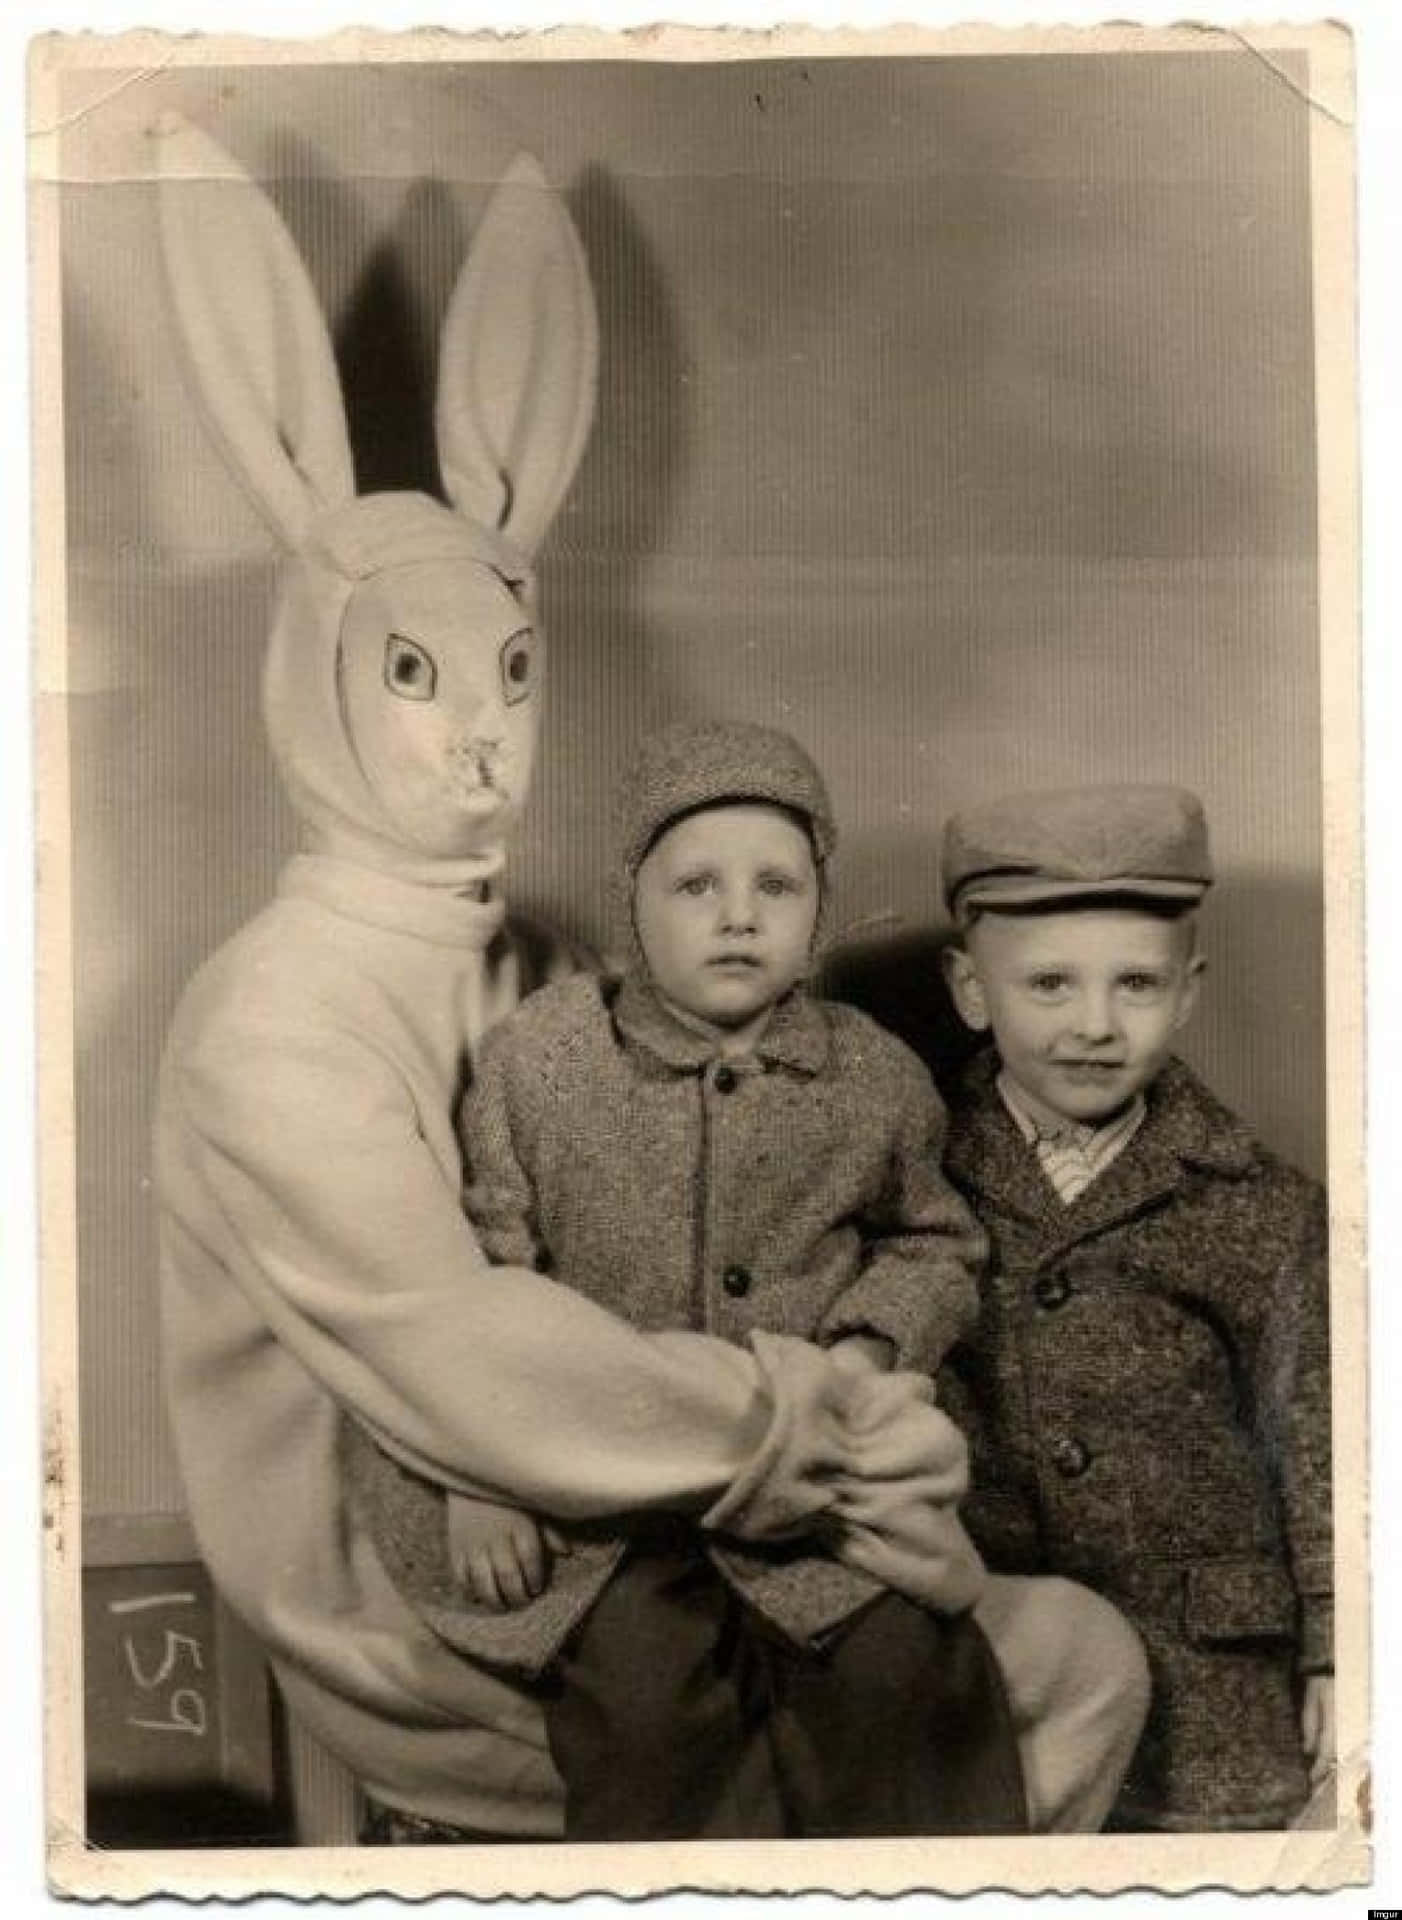 Don't be fooled by his cute face - the Creepy Easter Bunny has an agenda of his own.